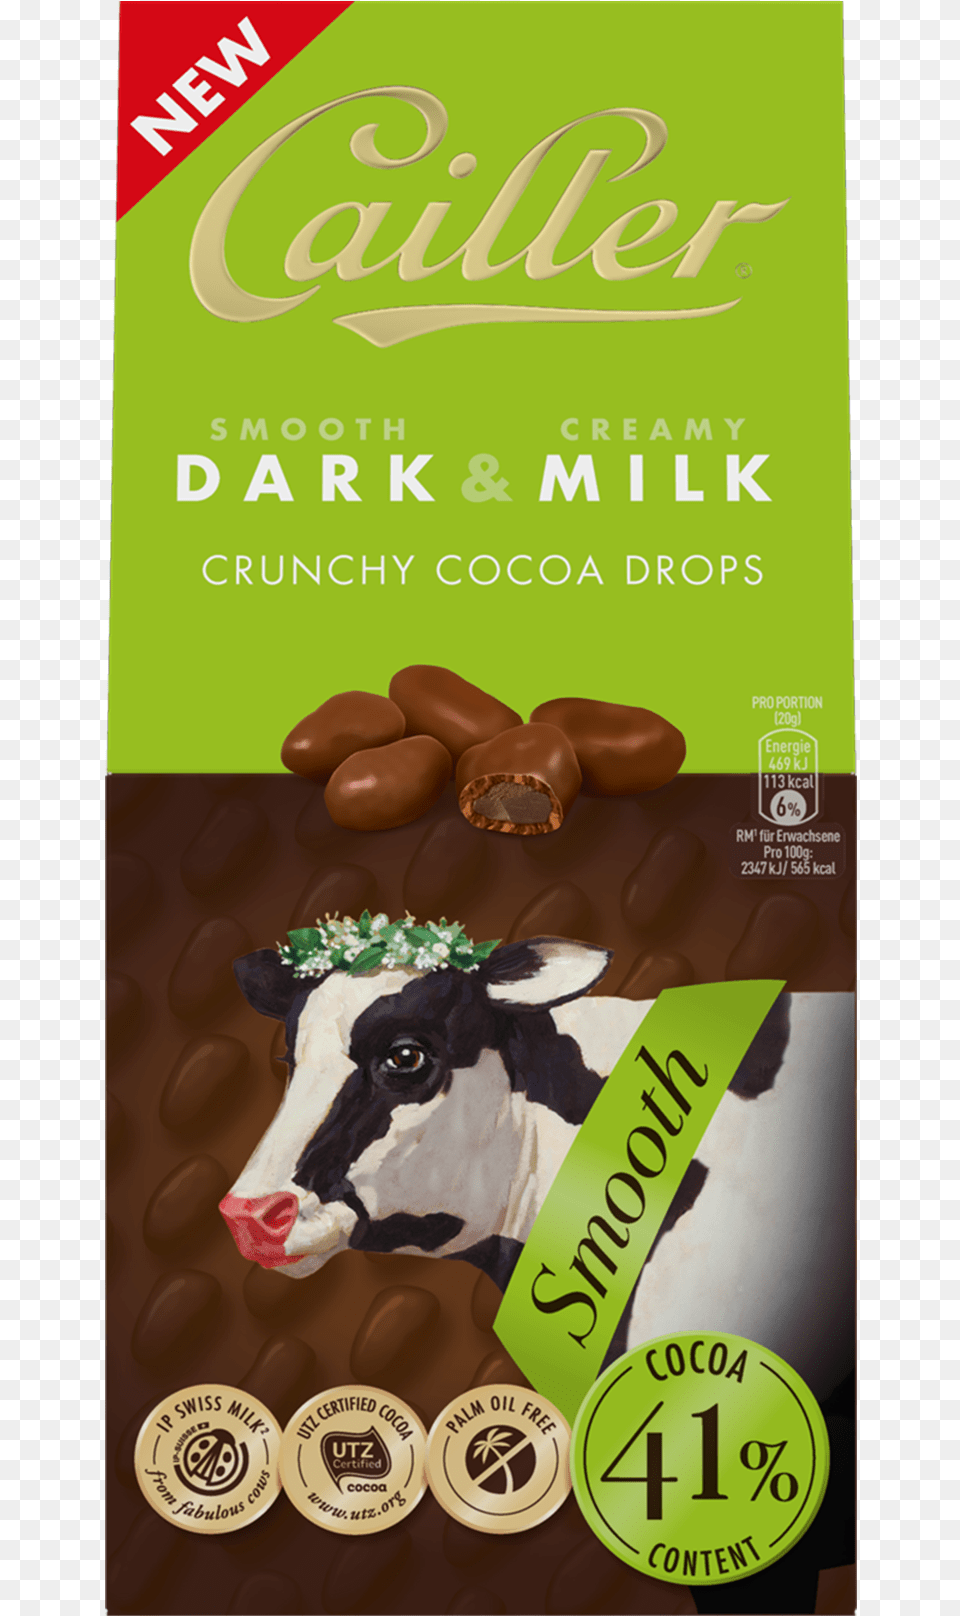 Darkampmilk Crunchy Cocoa Drops 41 Smooth Cacao 80g Cailler Dark And Milk, Advertisement, Animal, Cattle, Livestock Png Image